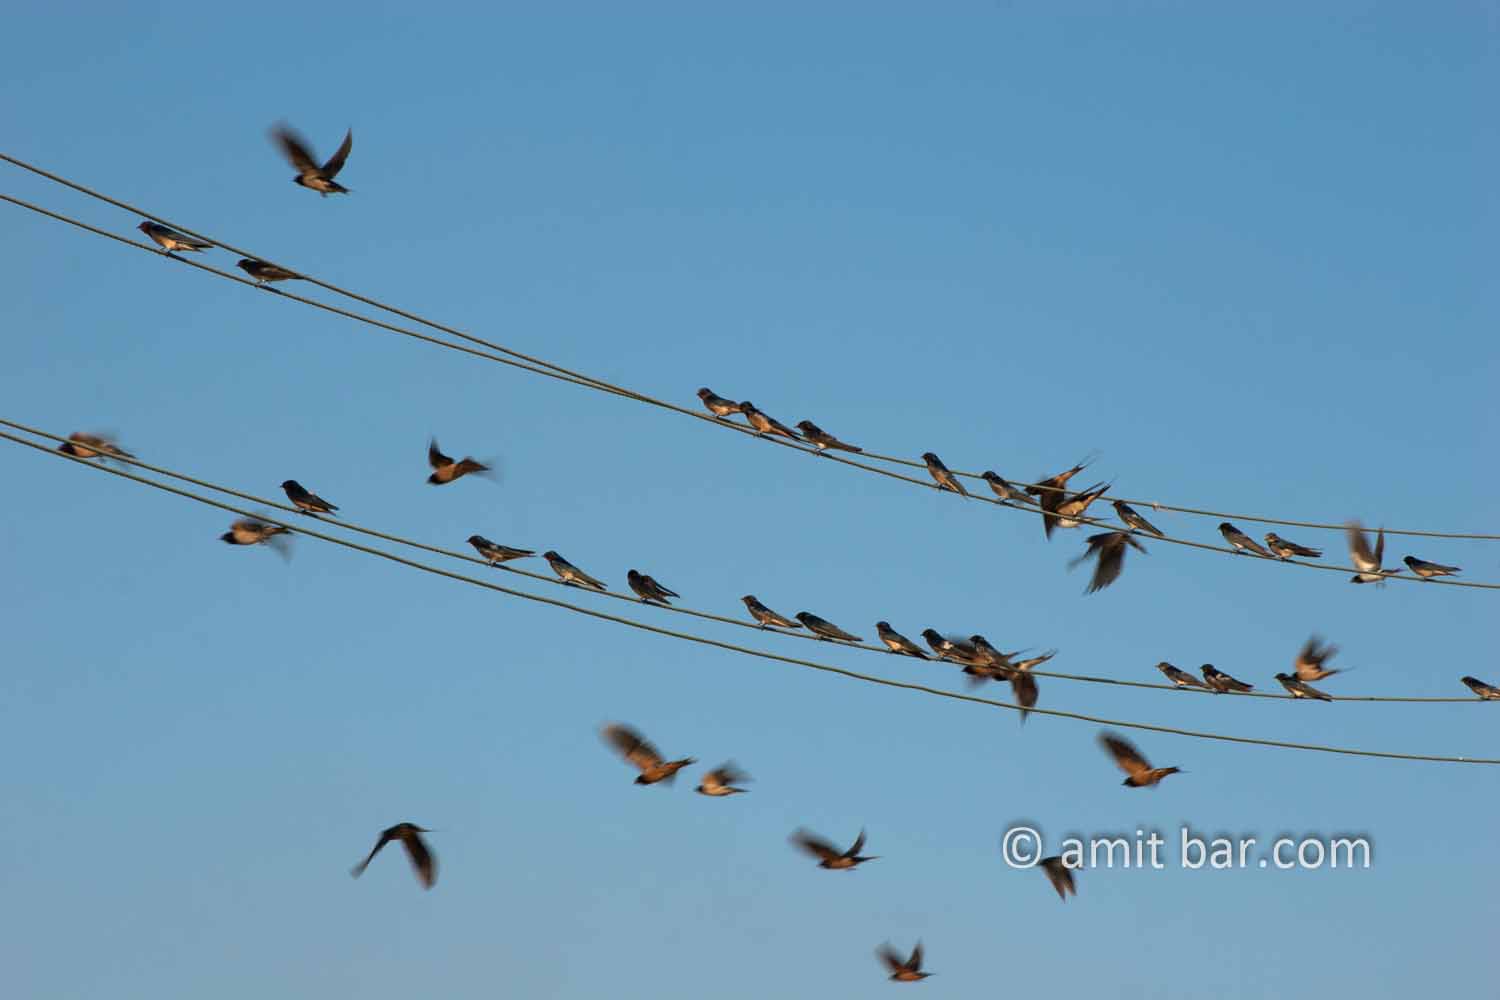 Swallows III: Swallows on electric wire